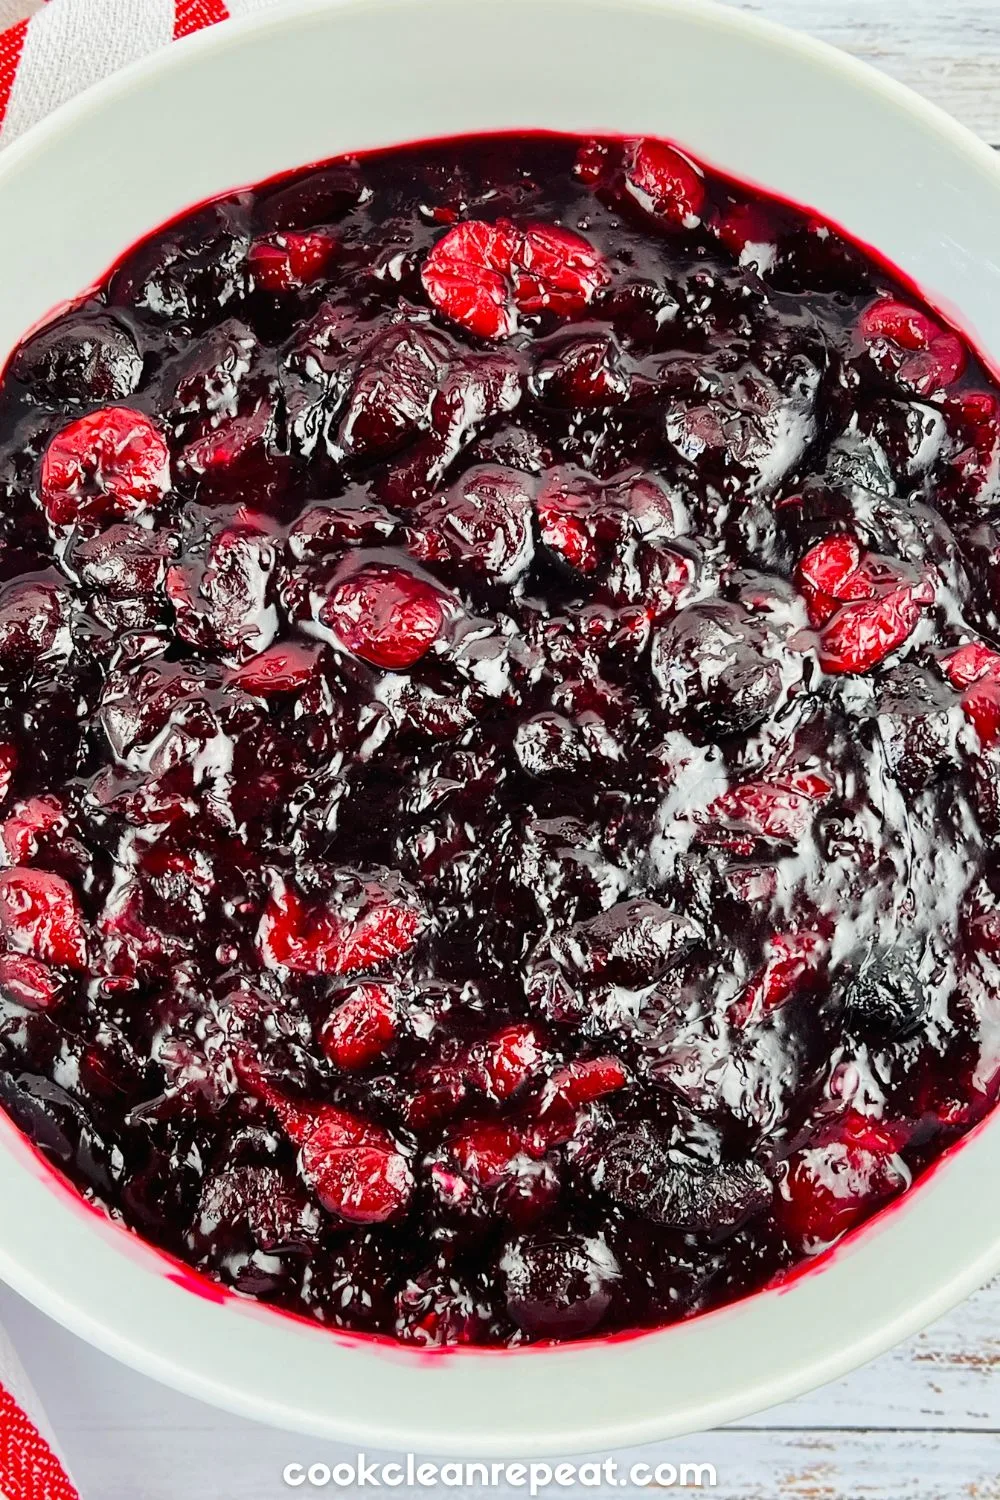 Cherry Pie Filling in a bowl close up showing texture